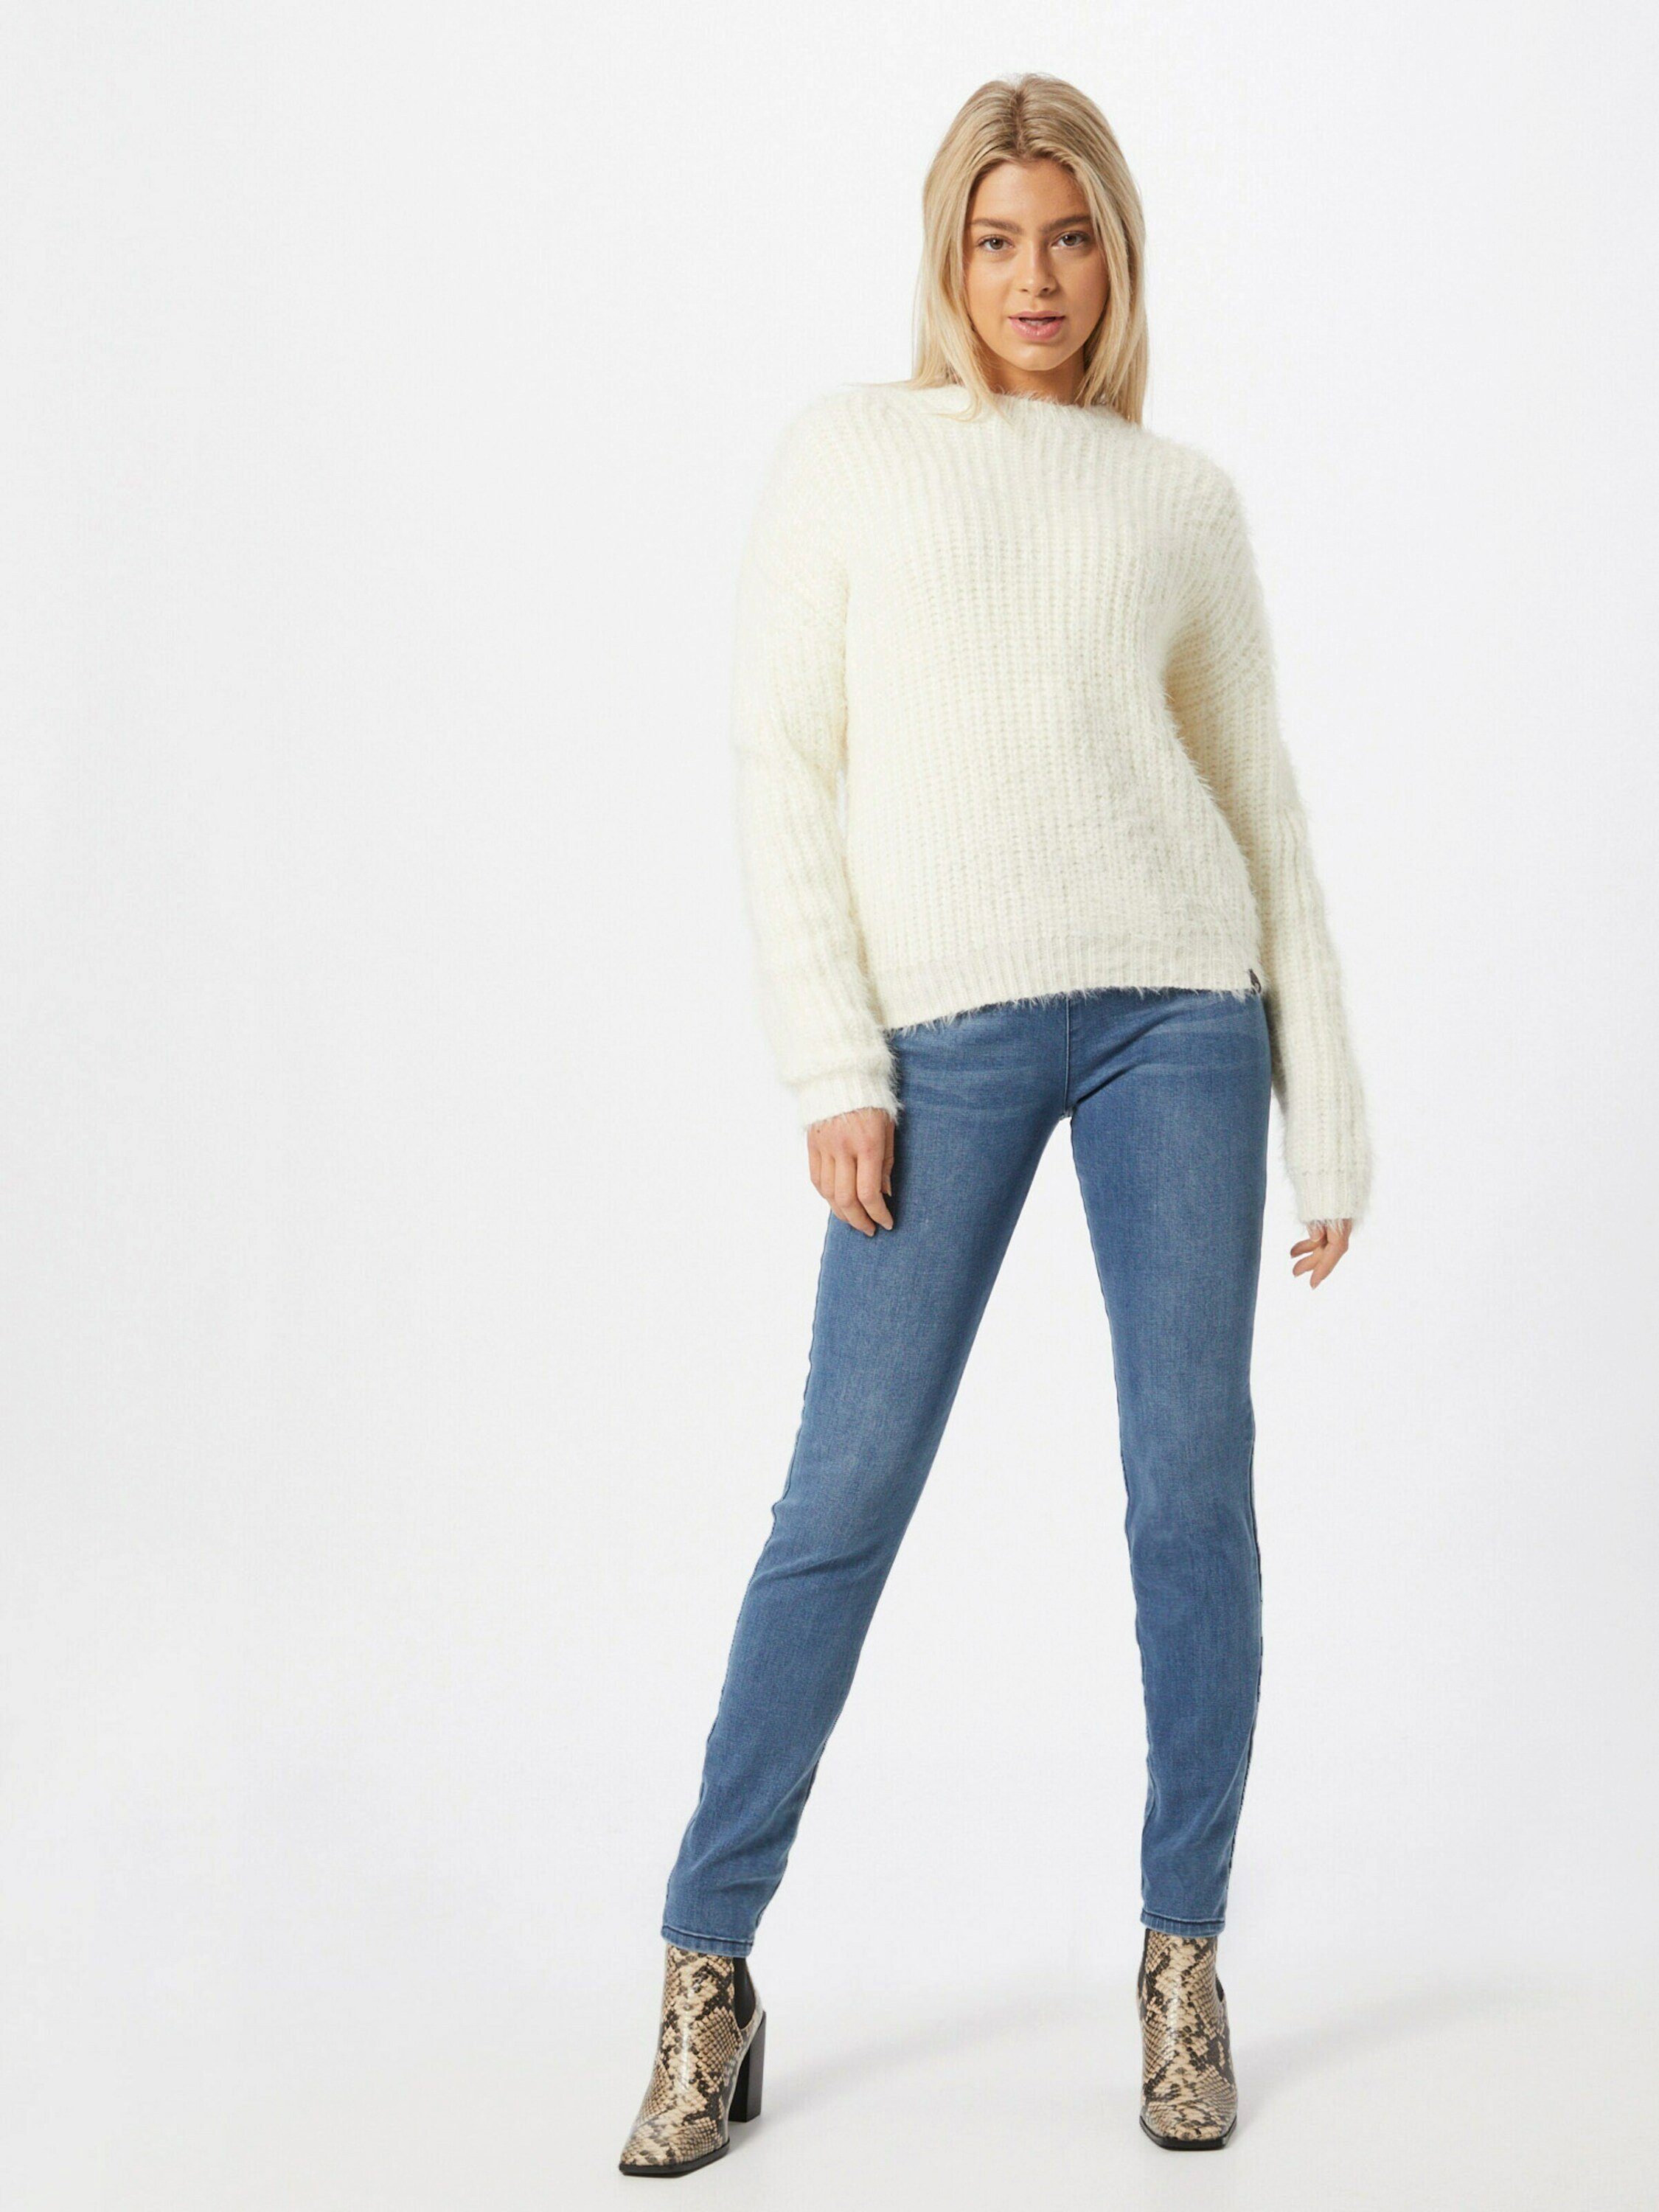 Weiteres FREEQUENT Skinny-fit-Jeans Detail, Shantal Details (1-tlg) Plain/ohne